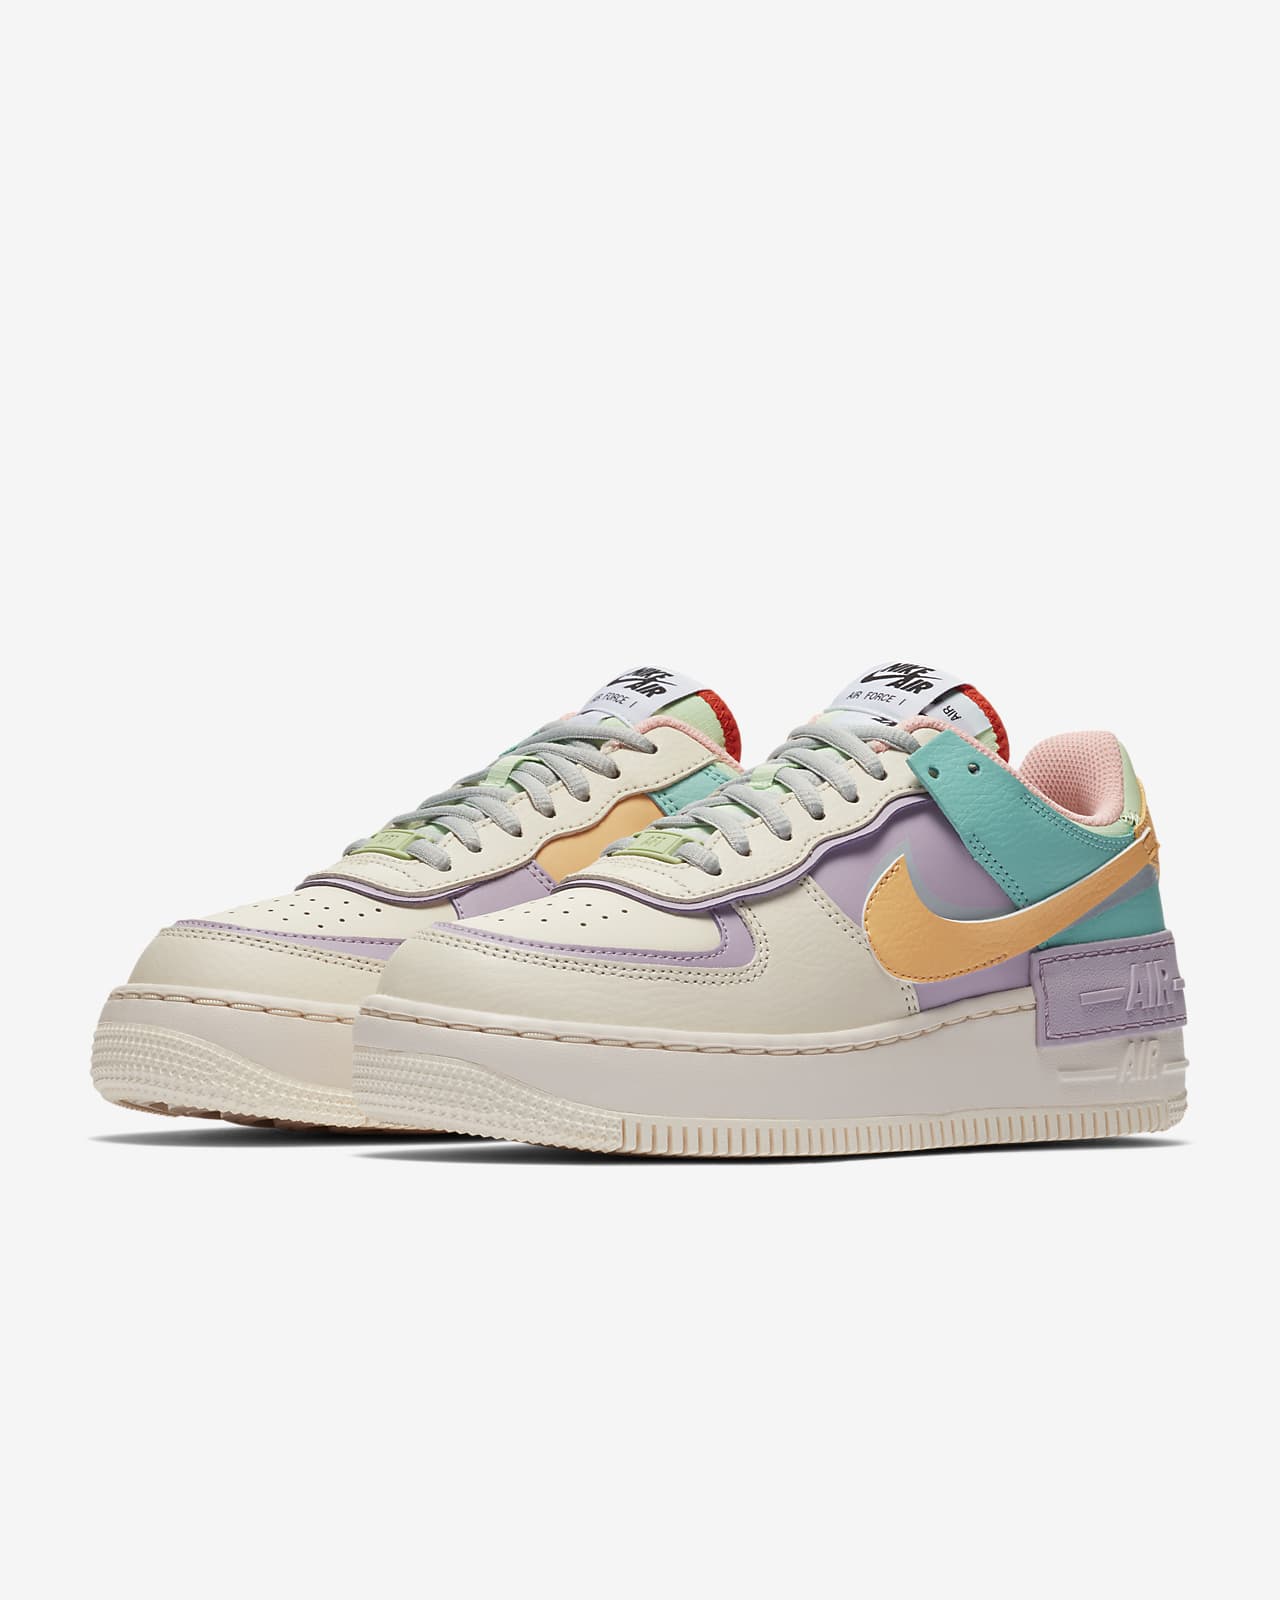 nike air force 1 shadow pale ivory canada